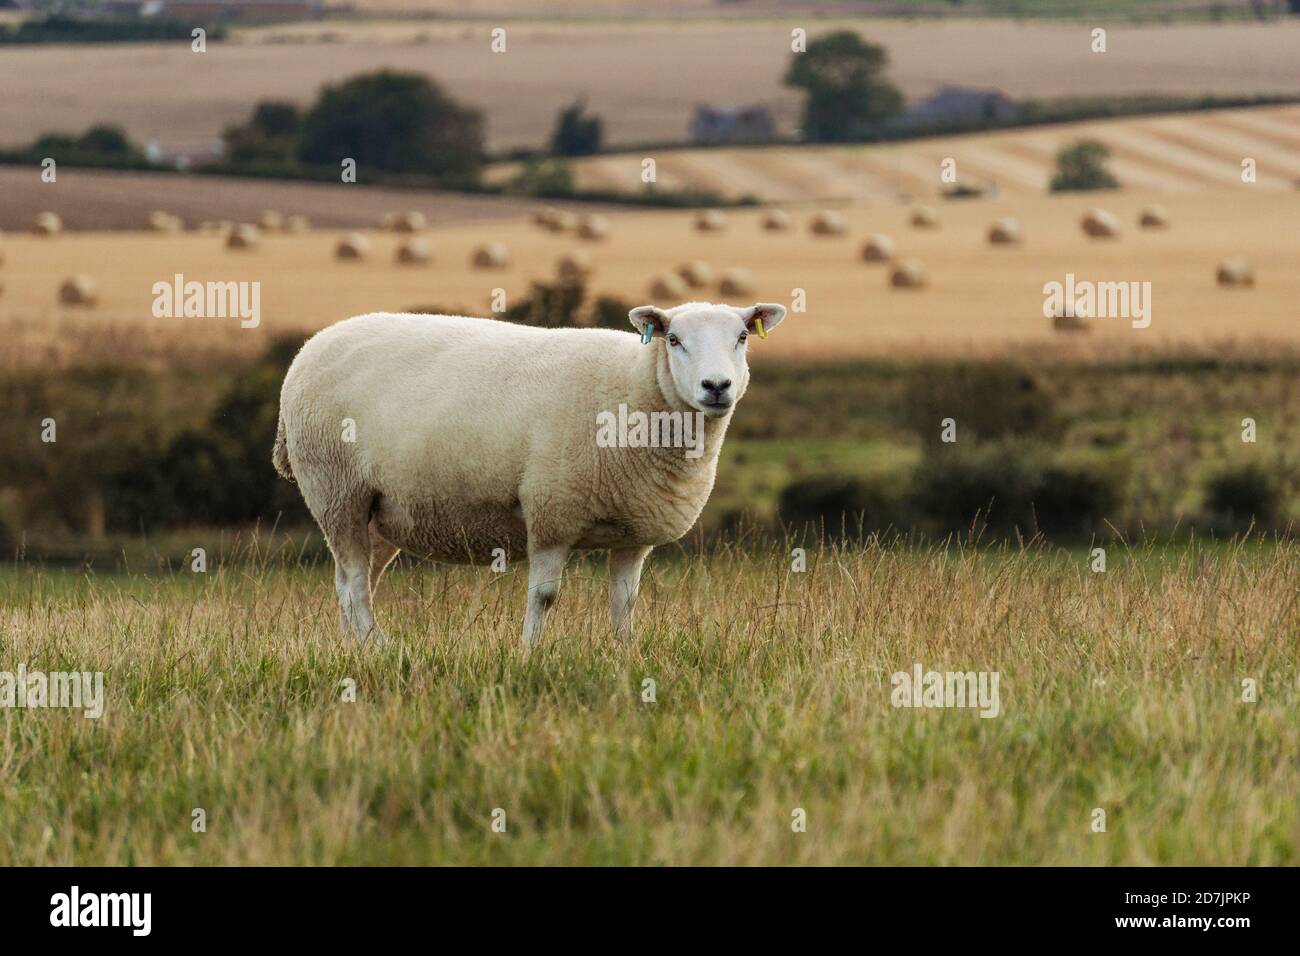 Sheep in Field with Scottish Countryside View Stock Photo